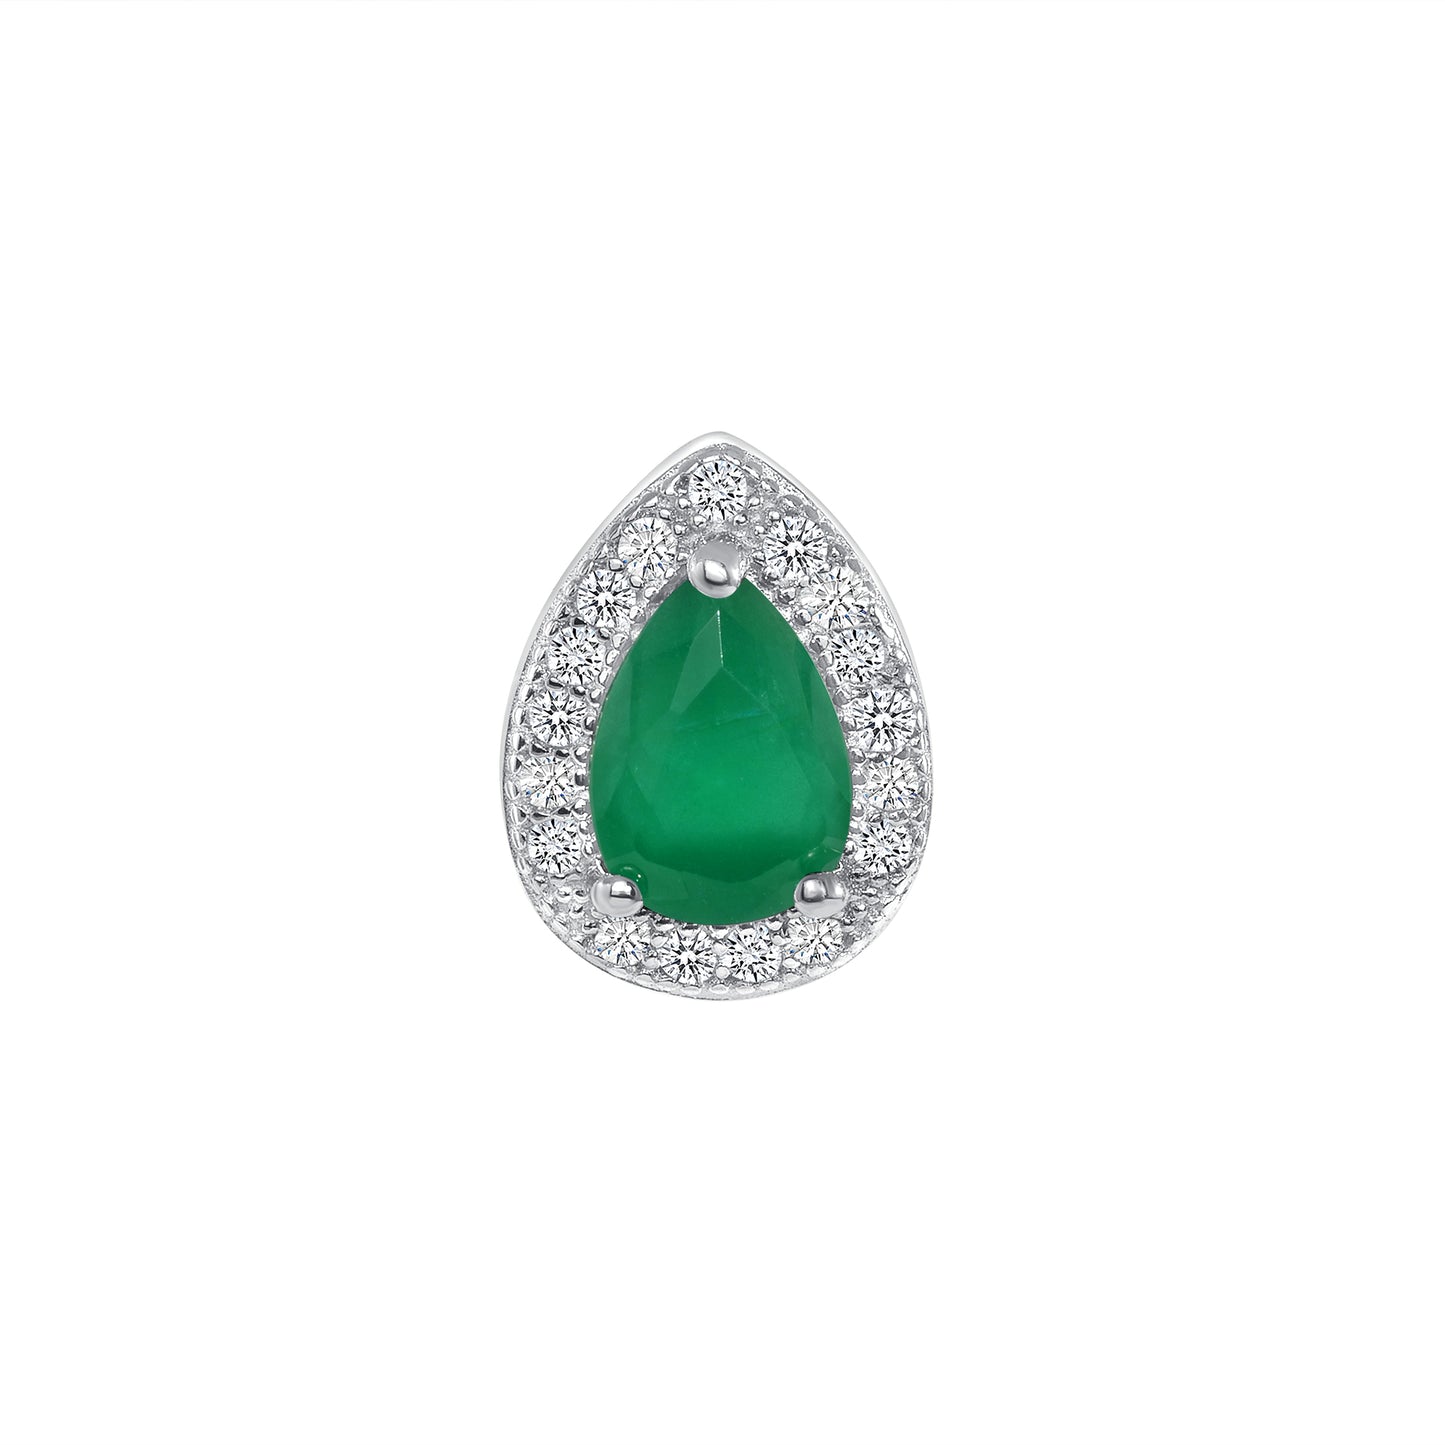 Silver 925 Rhodium Plated Pear Shape & Green Cubic Zirconia Stud. BE8159GRN